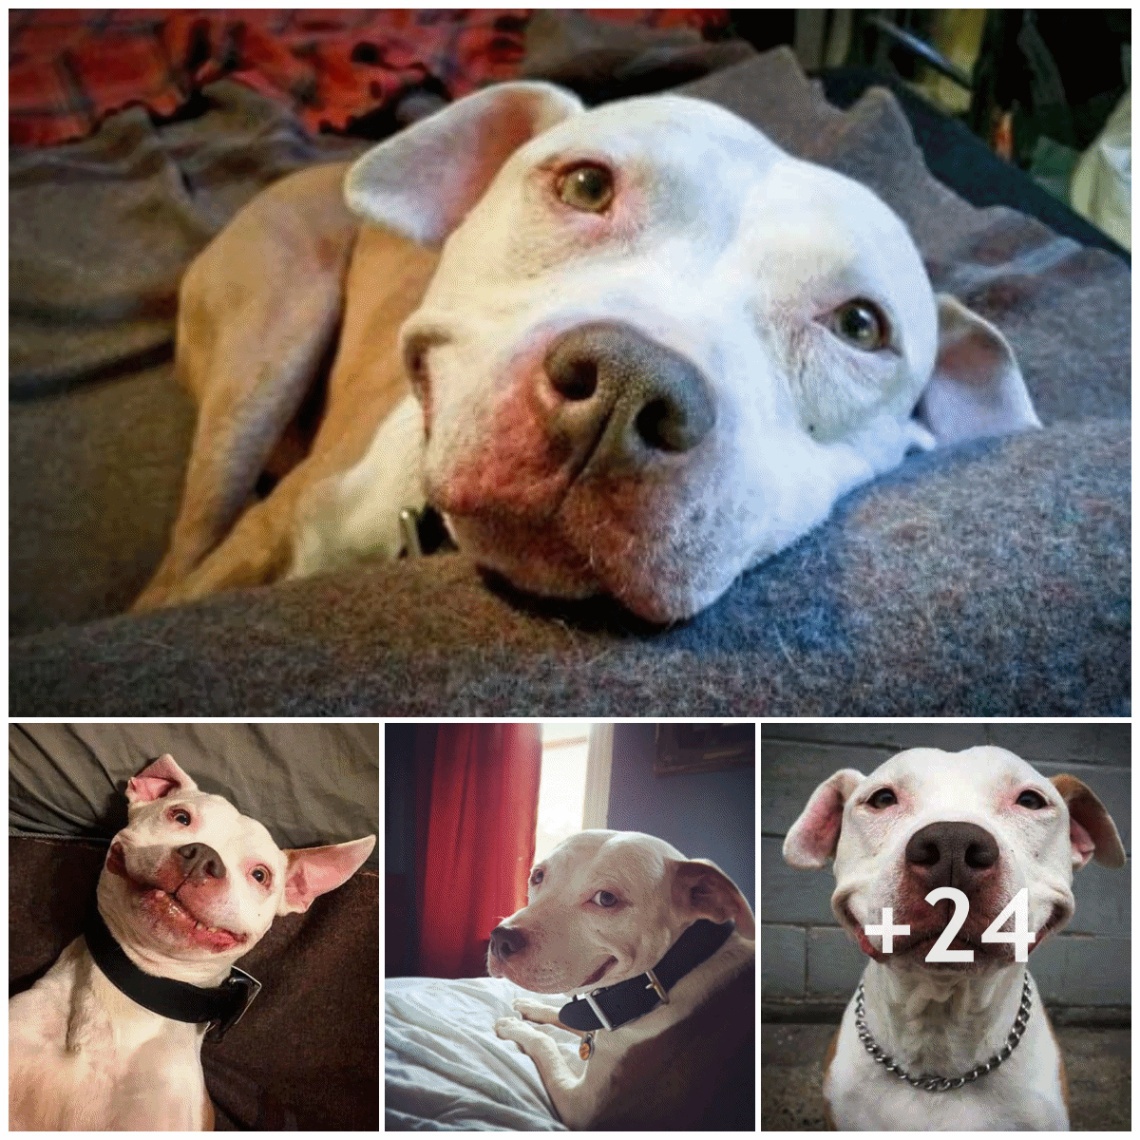 After overcoming the accident and being rescued, Pit Bull became more affectionate and always saved everyone with a bright and adorable smile.